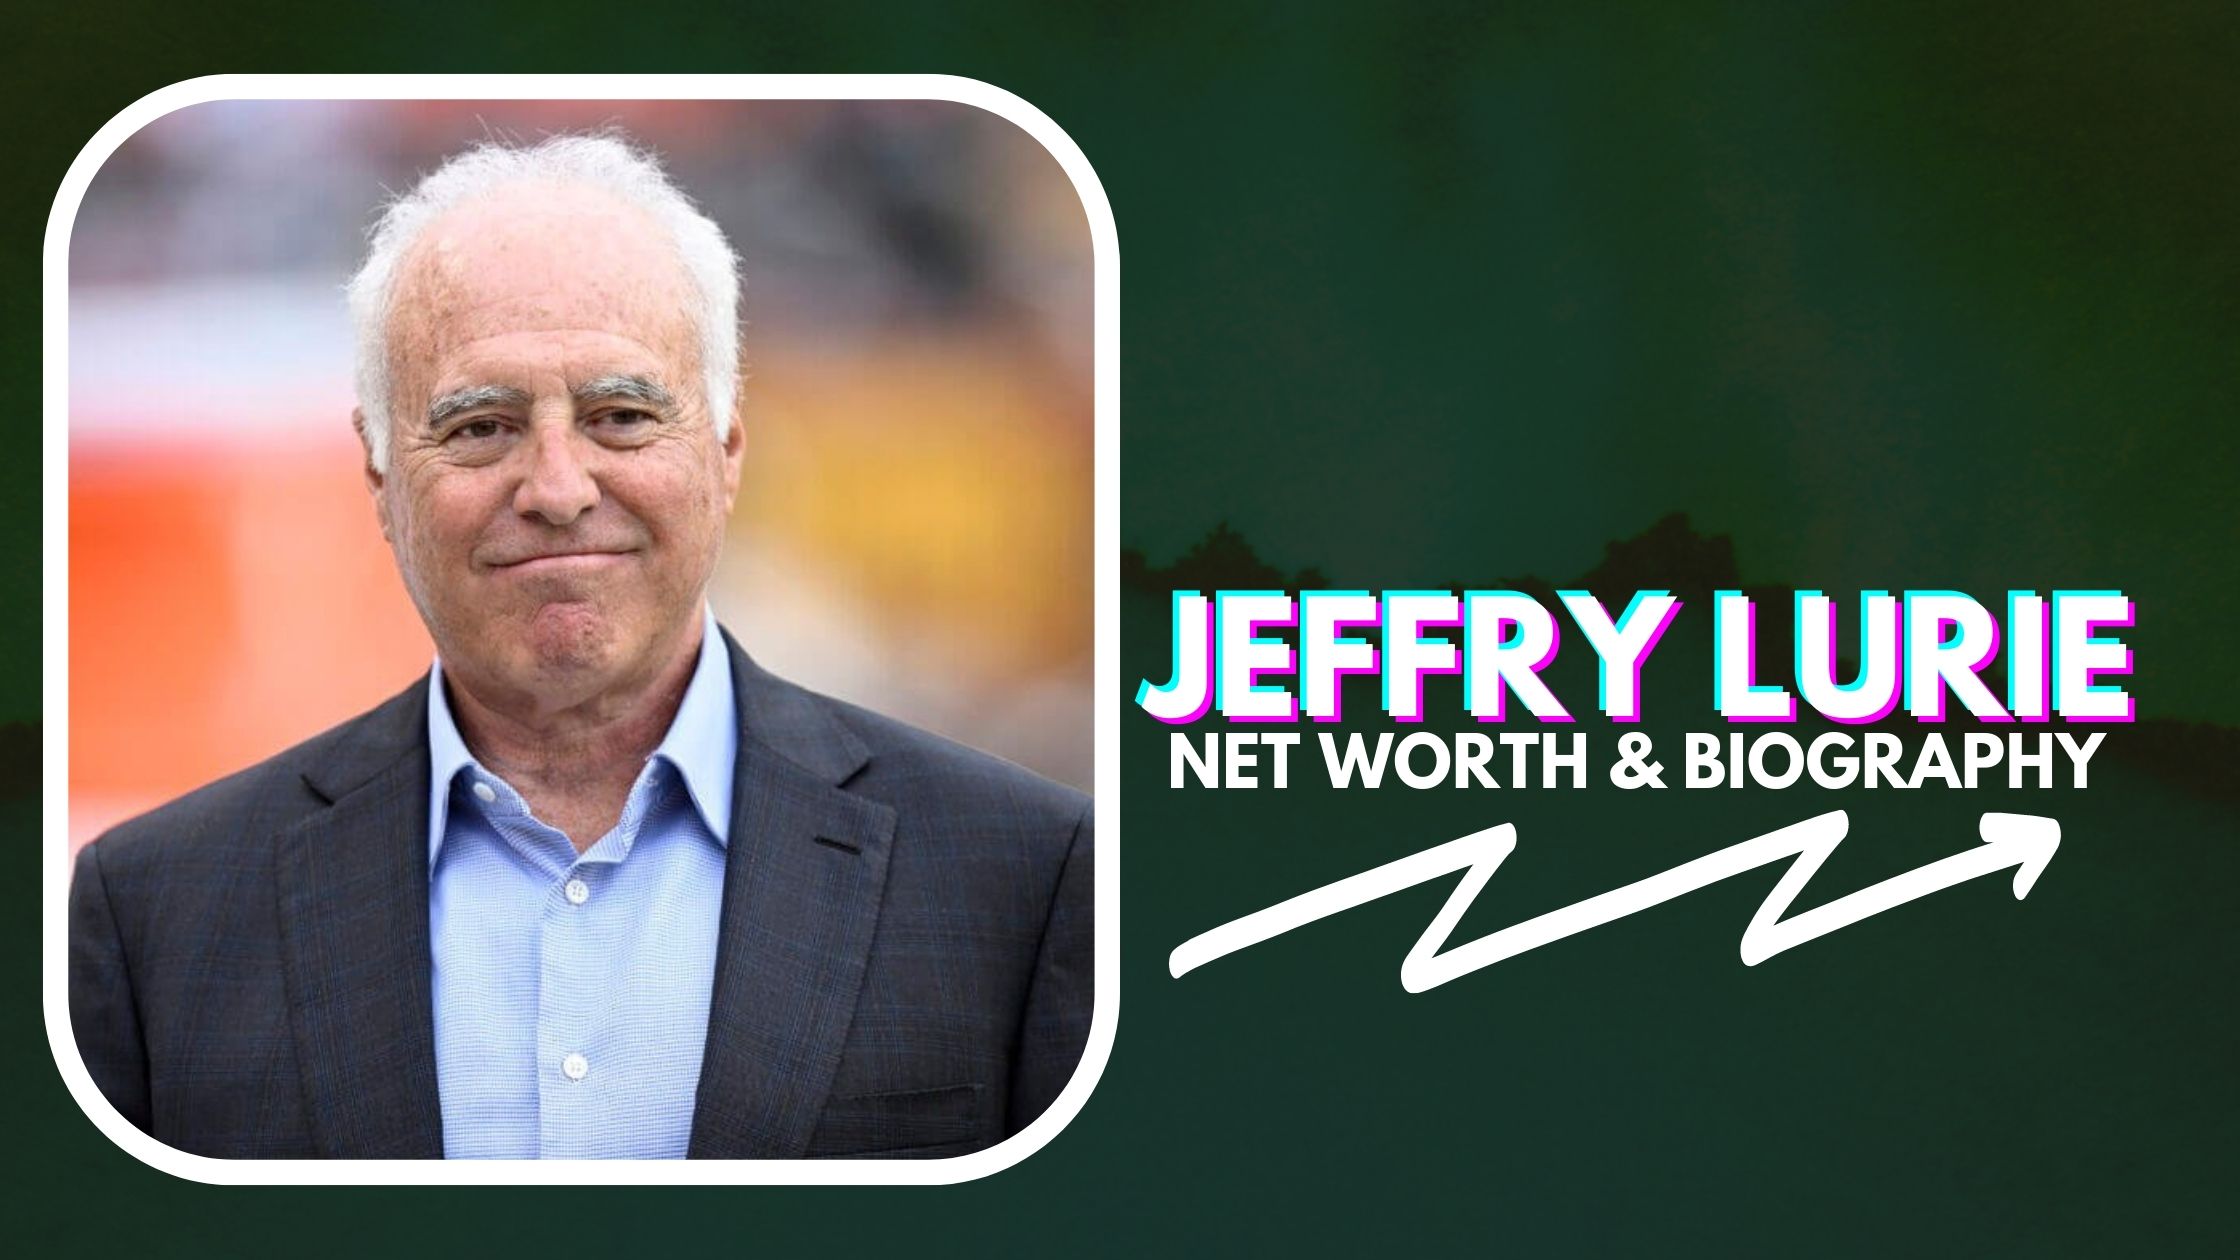 Jeffry Lurie Net Worth And Biography